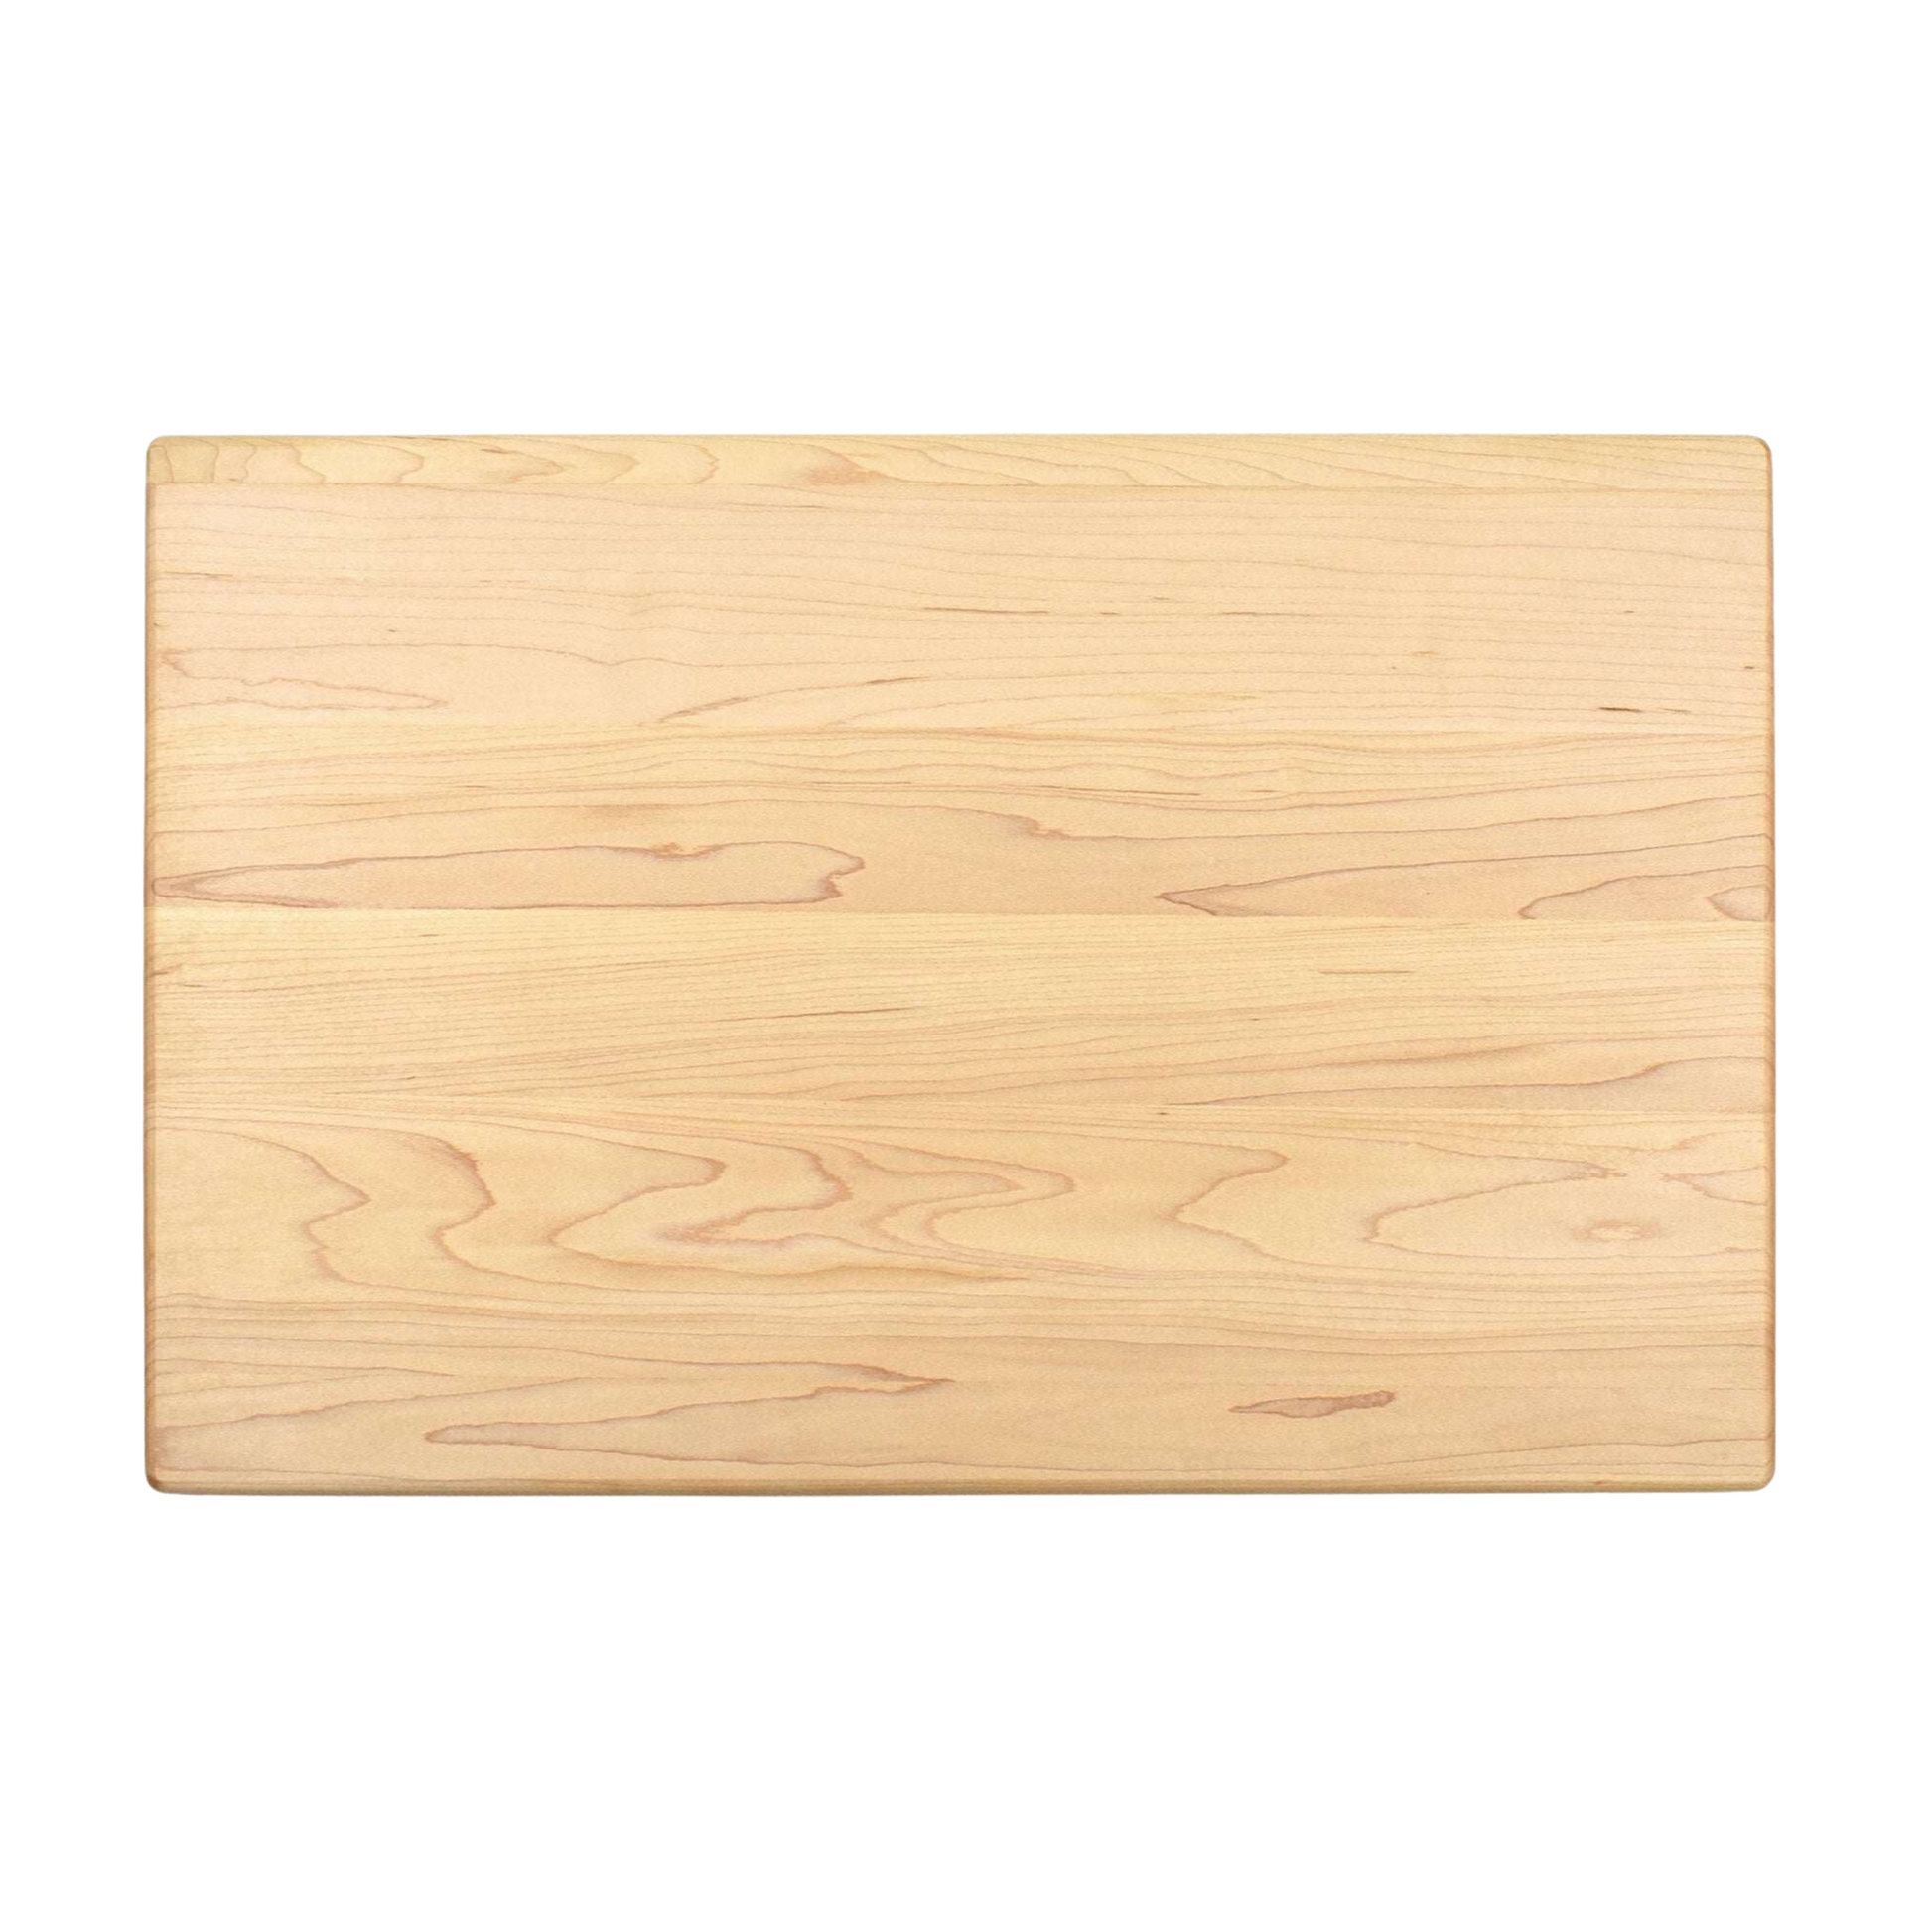 Crazy Plant Lady Cutting Board - Premium Cutting Boards from Hipster Lasers - Just $90! Shop now at Hipster Lasers